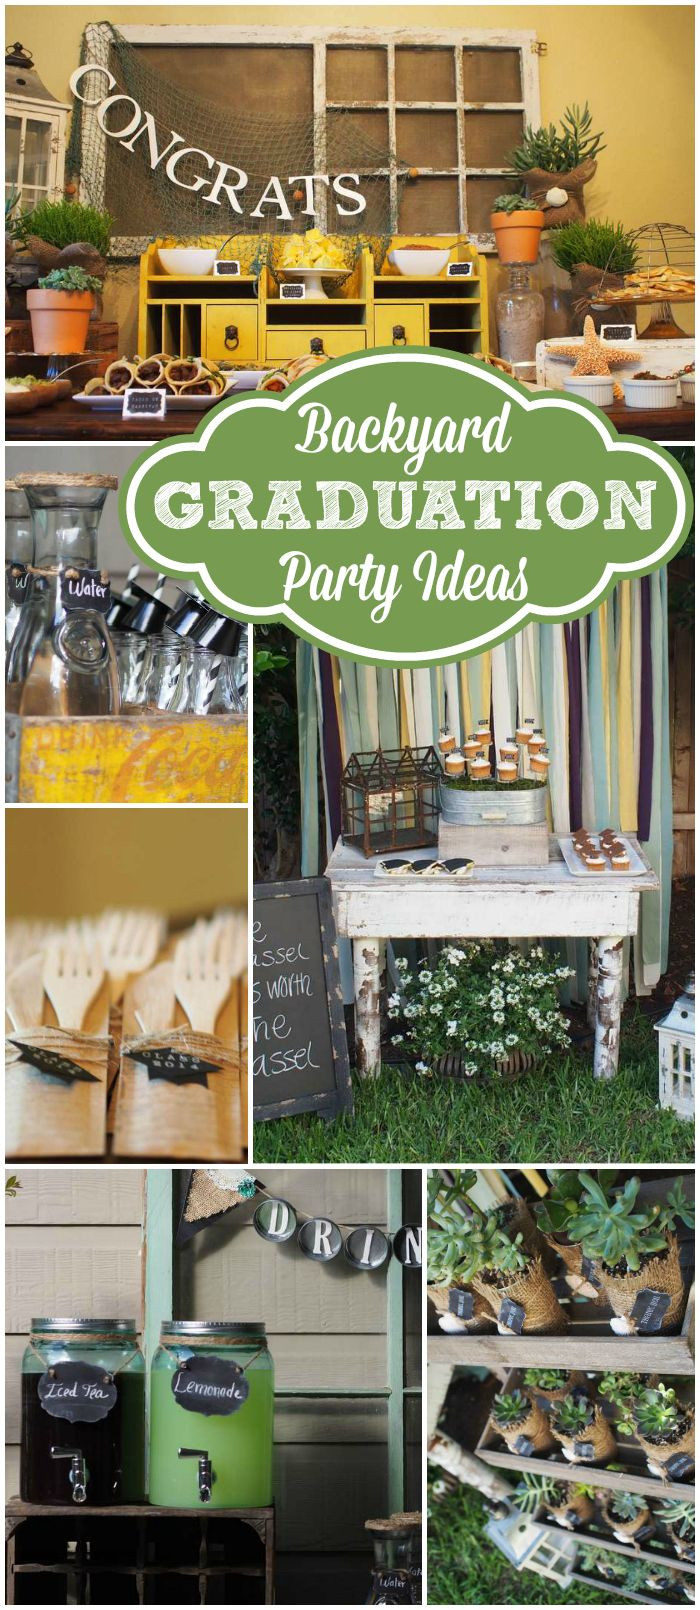 Boy Backyard Graduation Party Ideas
 Here s a trendy masculine outdoor graduation party See